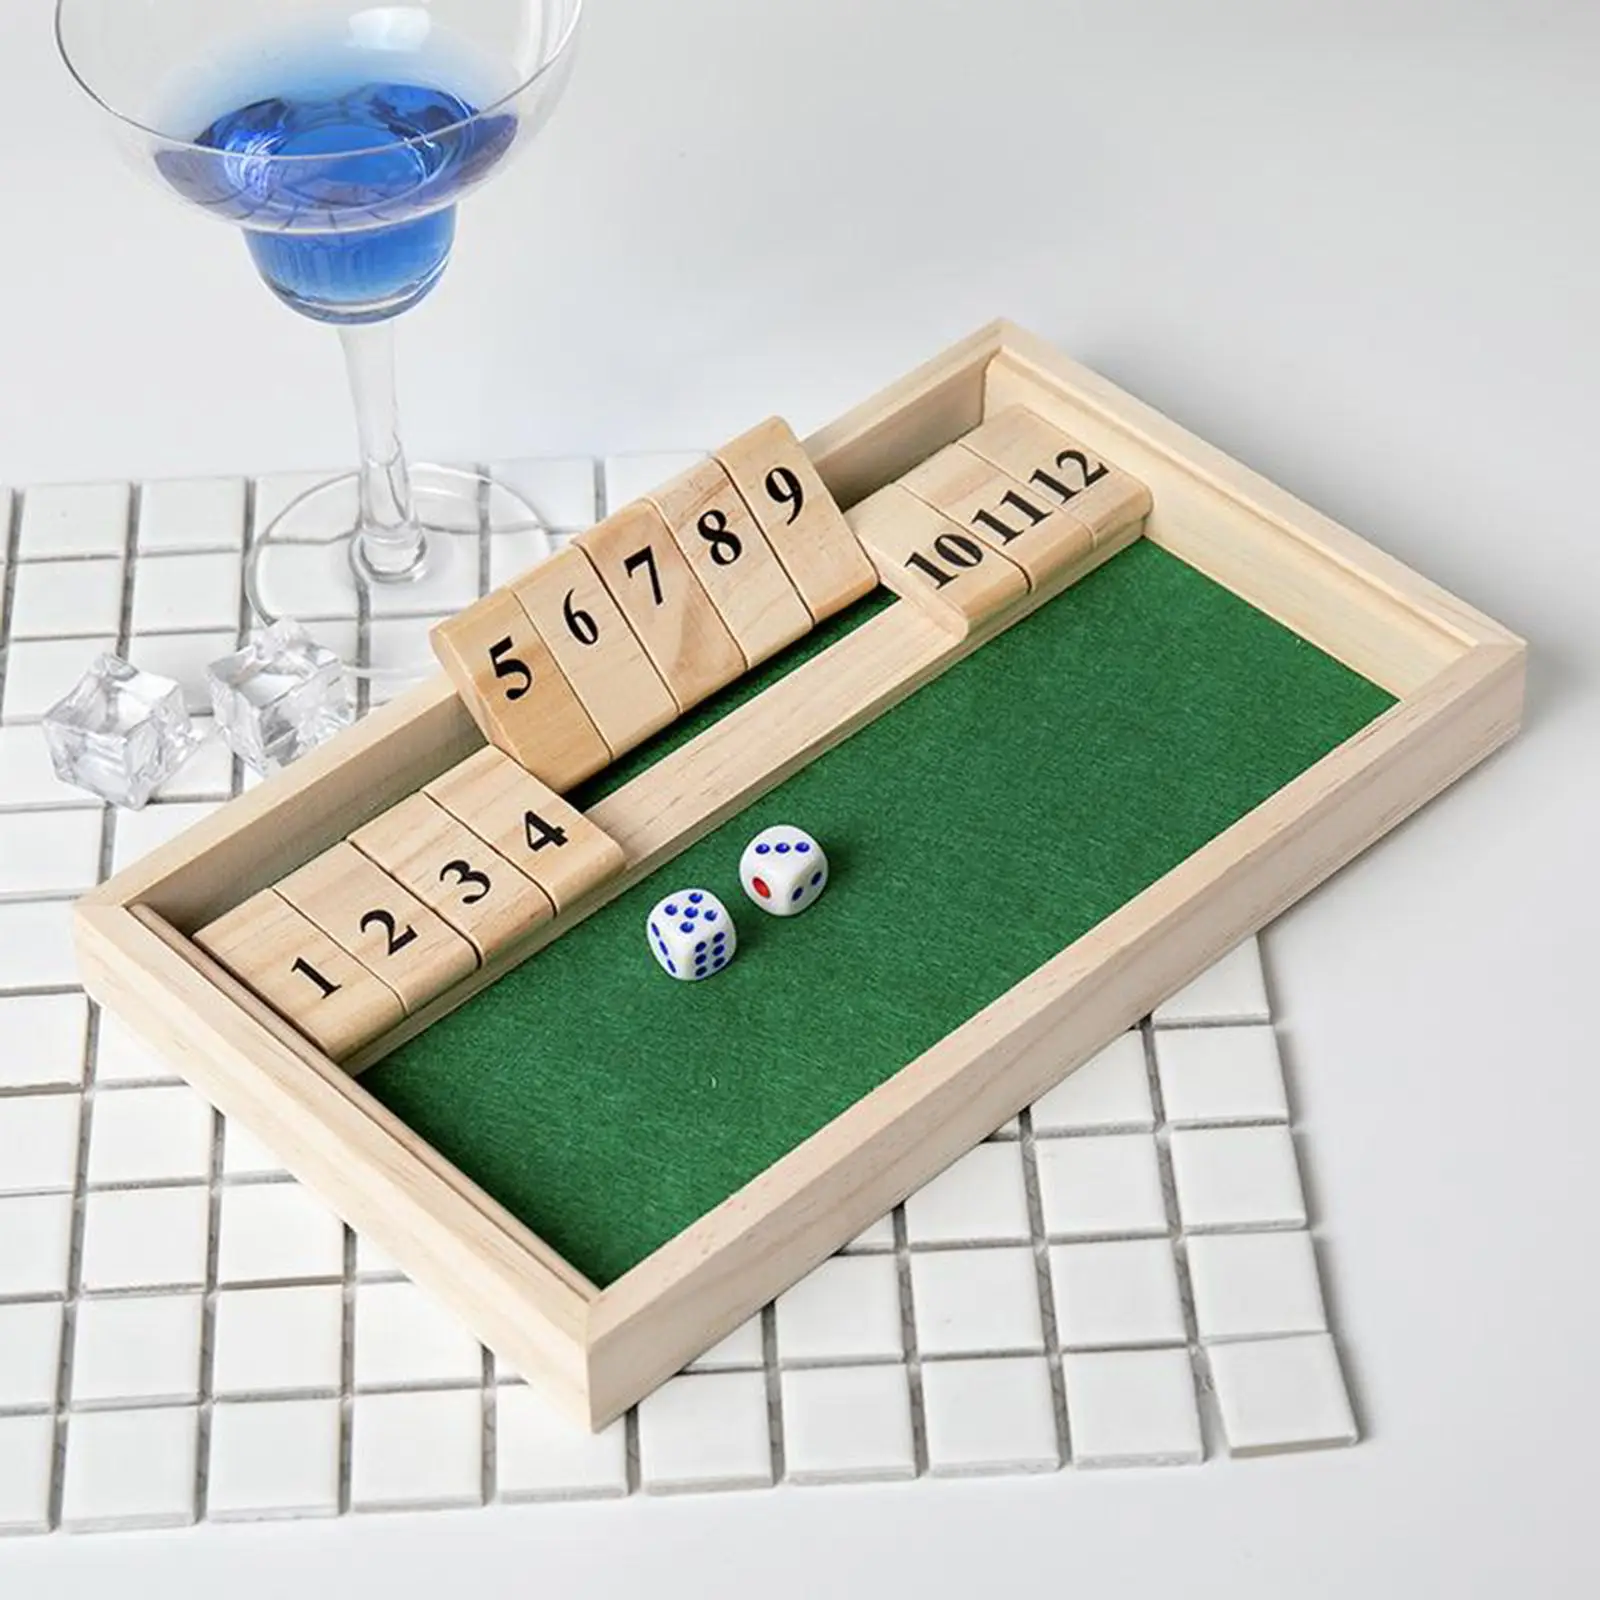 Shut The Box Wooden Board Dice Game with 12 Numbers  Tabletop Traditional Games Indoor Play Fun Game Entertainment